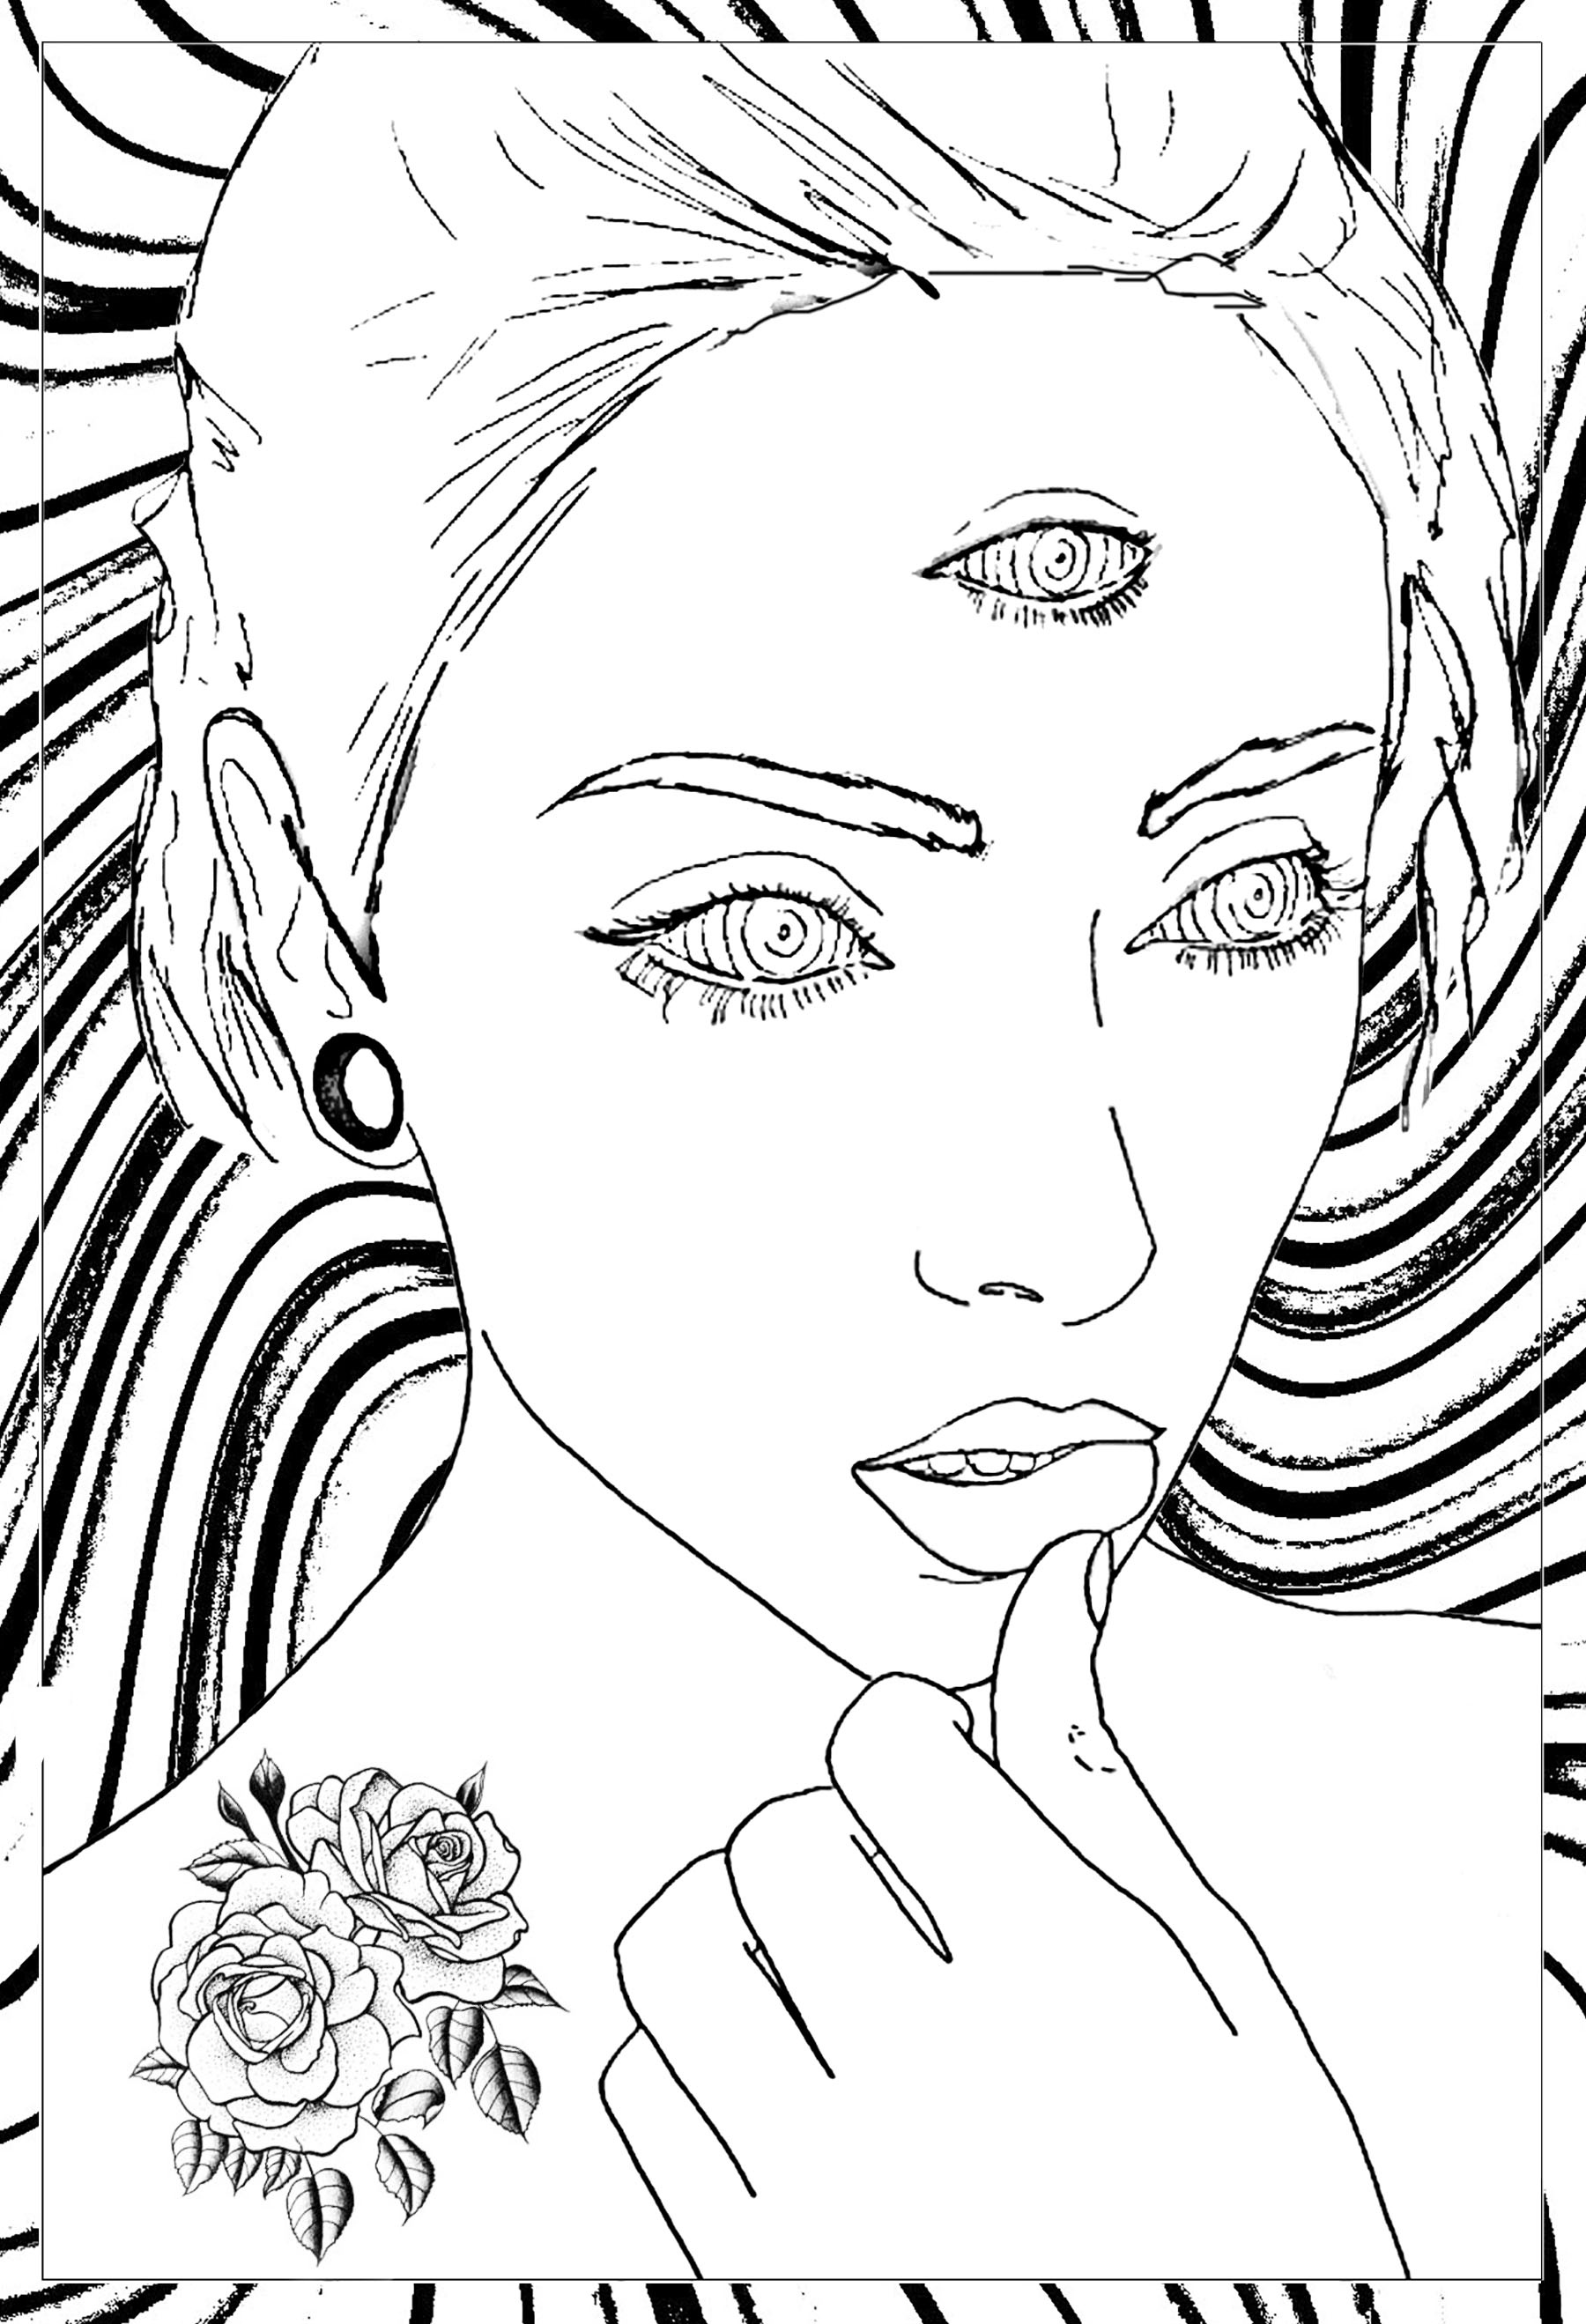 Original drawing of a pensive woman with 3 eyes ... with a very psychedelic background